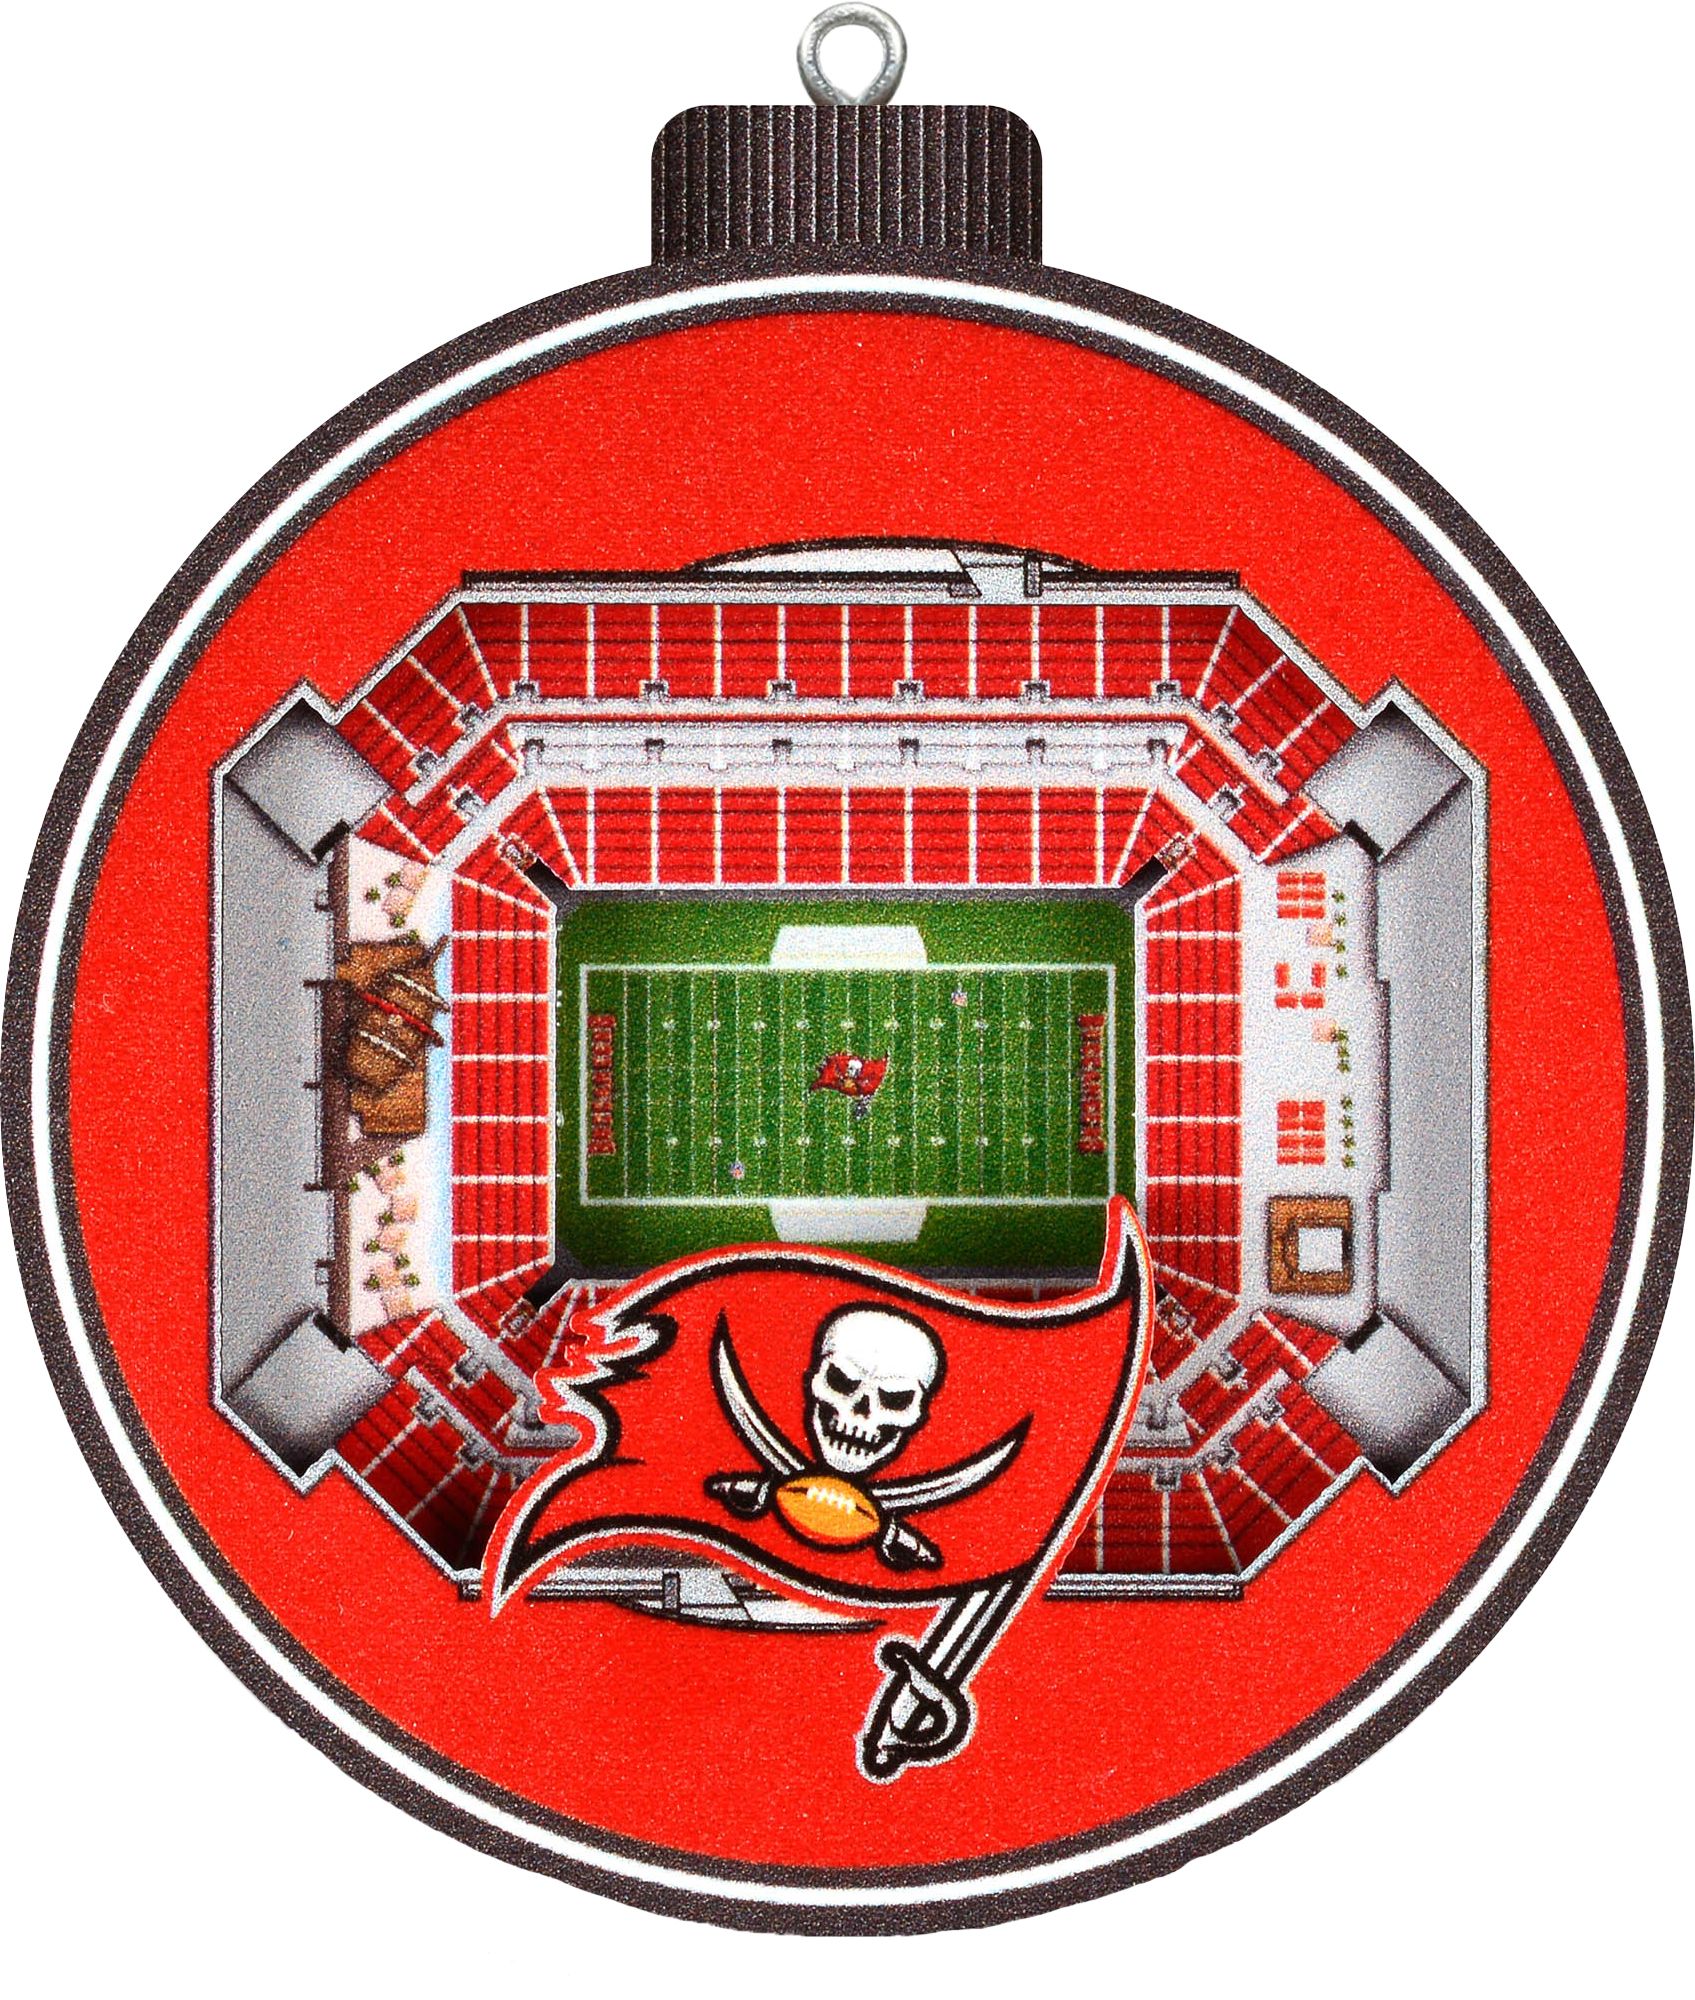 You The Fan Tampa Bay Buccaneers 3D Stadium Ornament